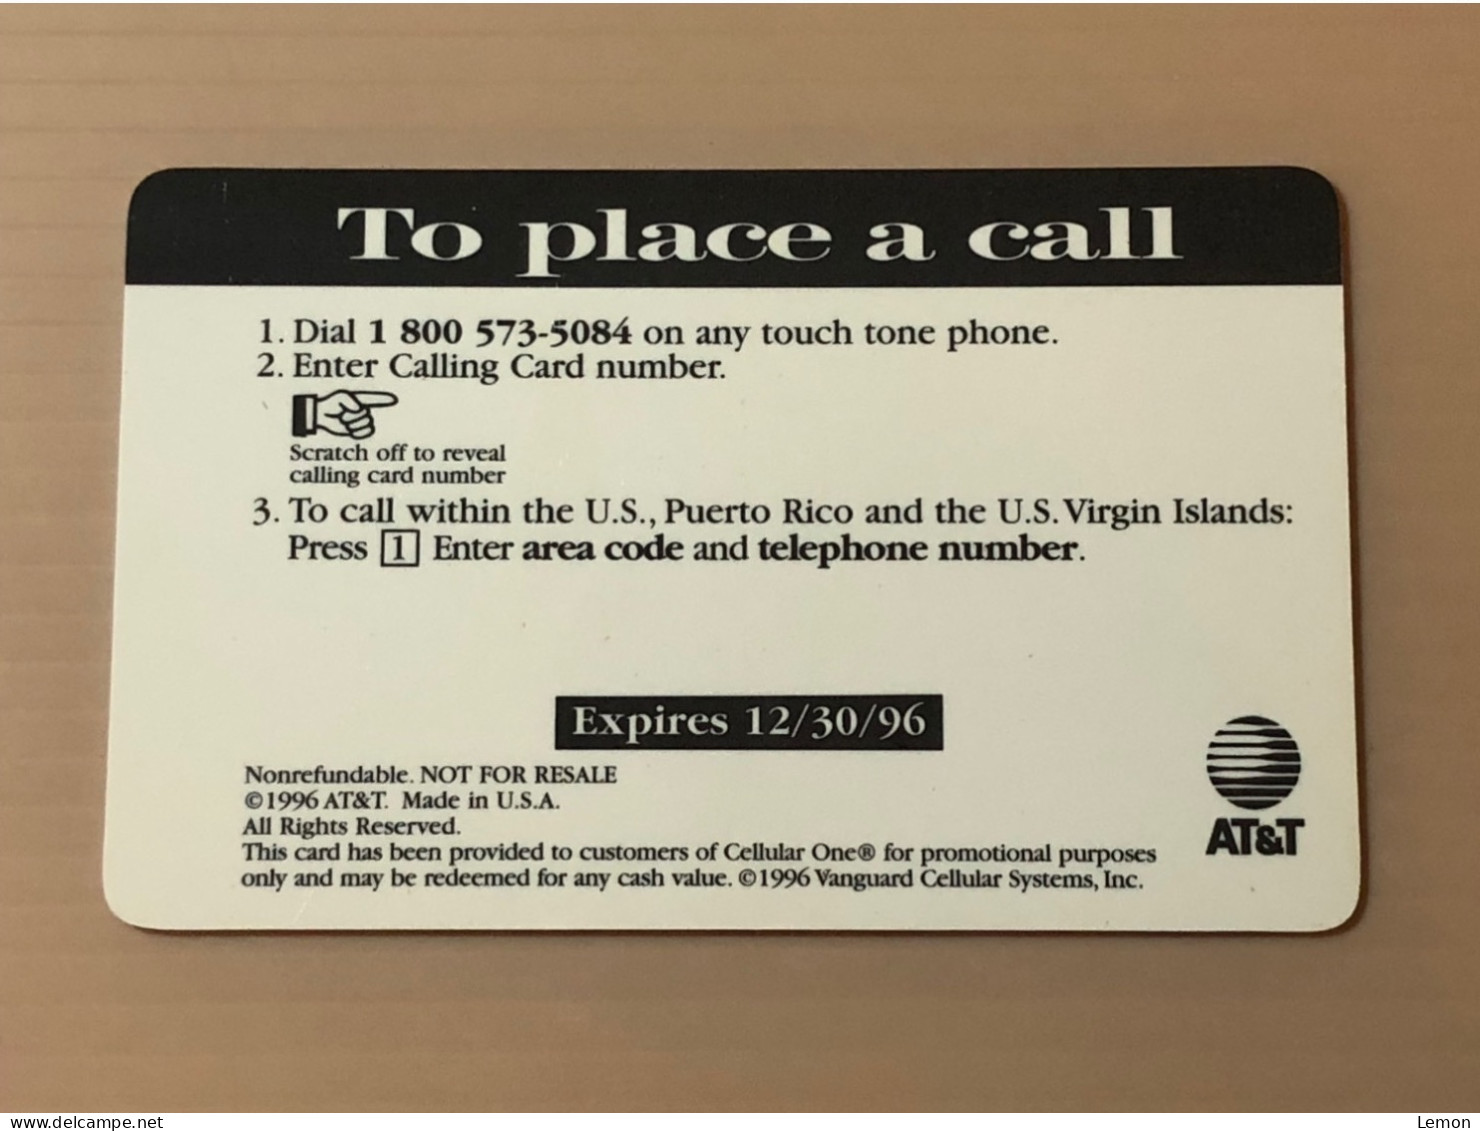 Mint USA UNITED STATES America Prepaid Telecard Phonecard, AT&T 90 CELLULAR ONE SAMPLE CARD, Set Of 1 Mint Card - Collections